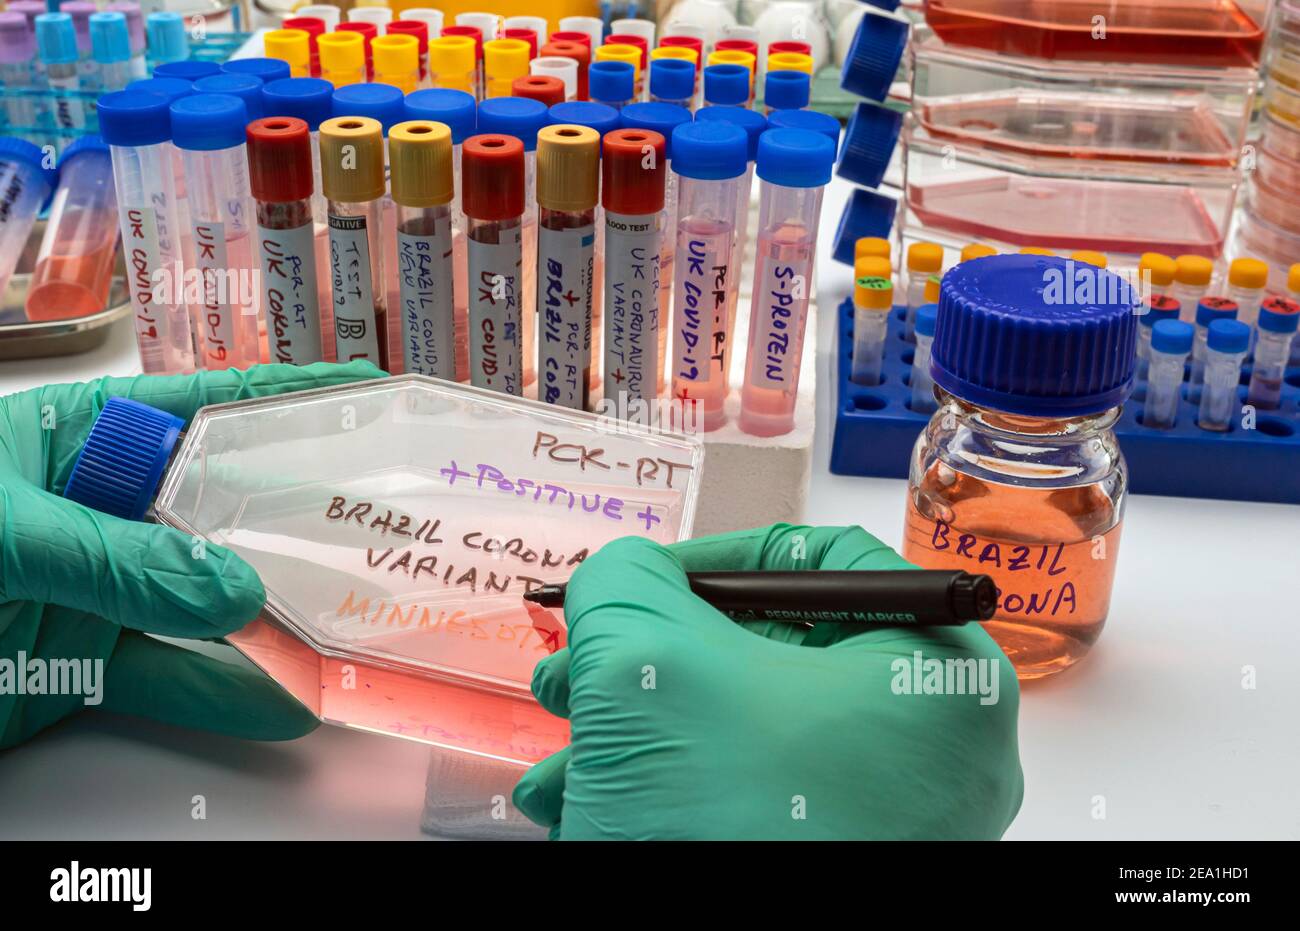 Scientist writes in a vial new variant of covid-19 virus from Brazil detected in Minnesota, concept image Stock Photo